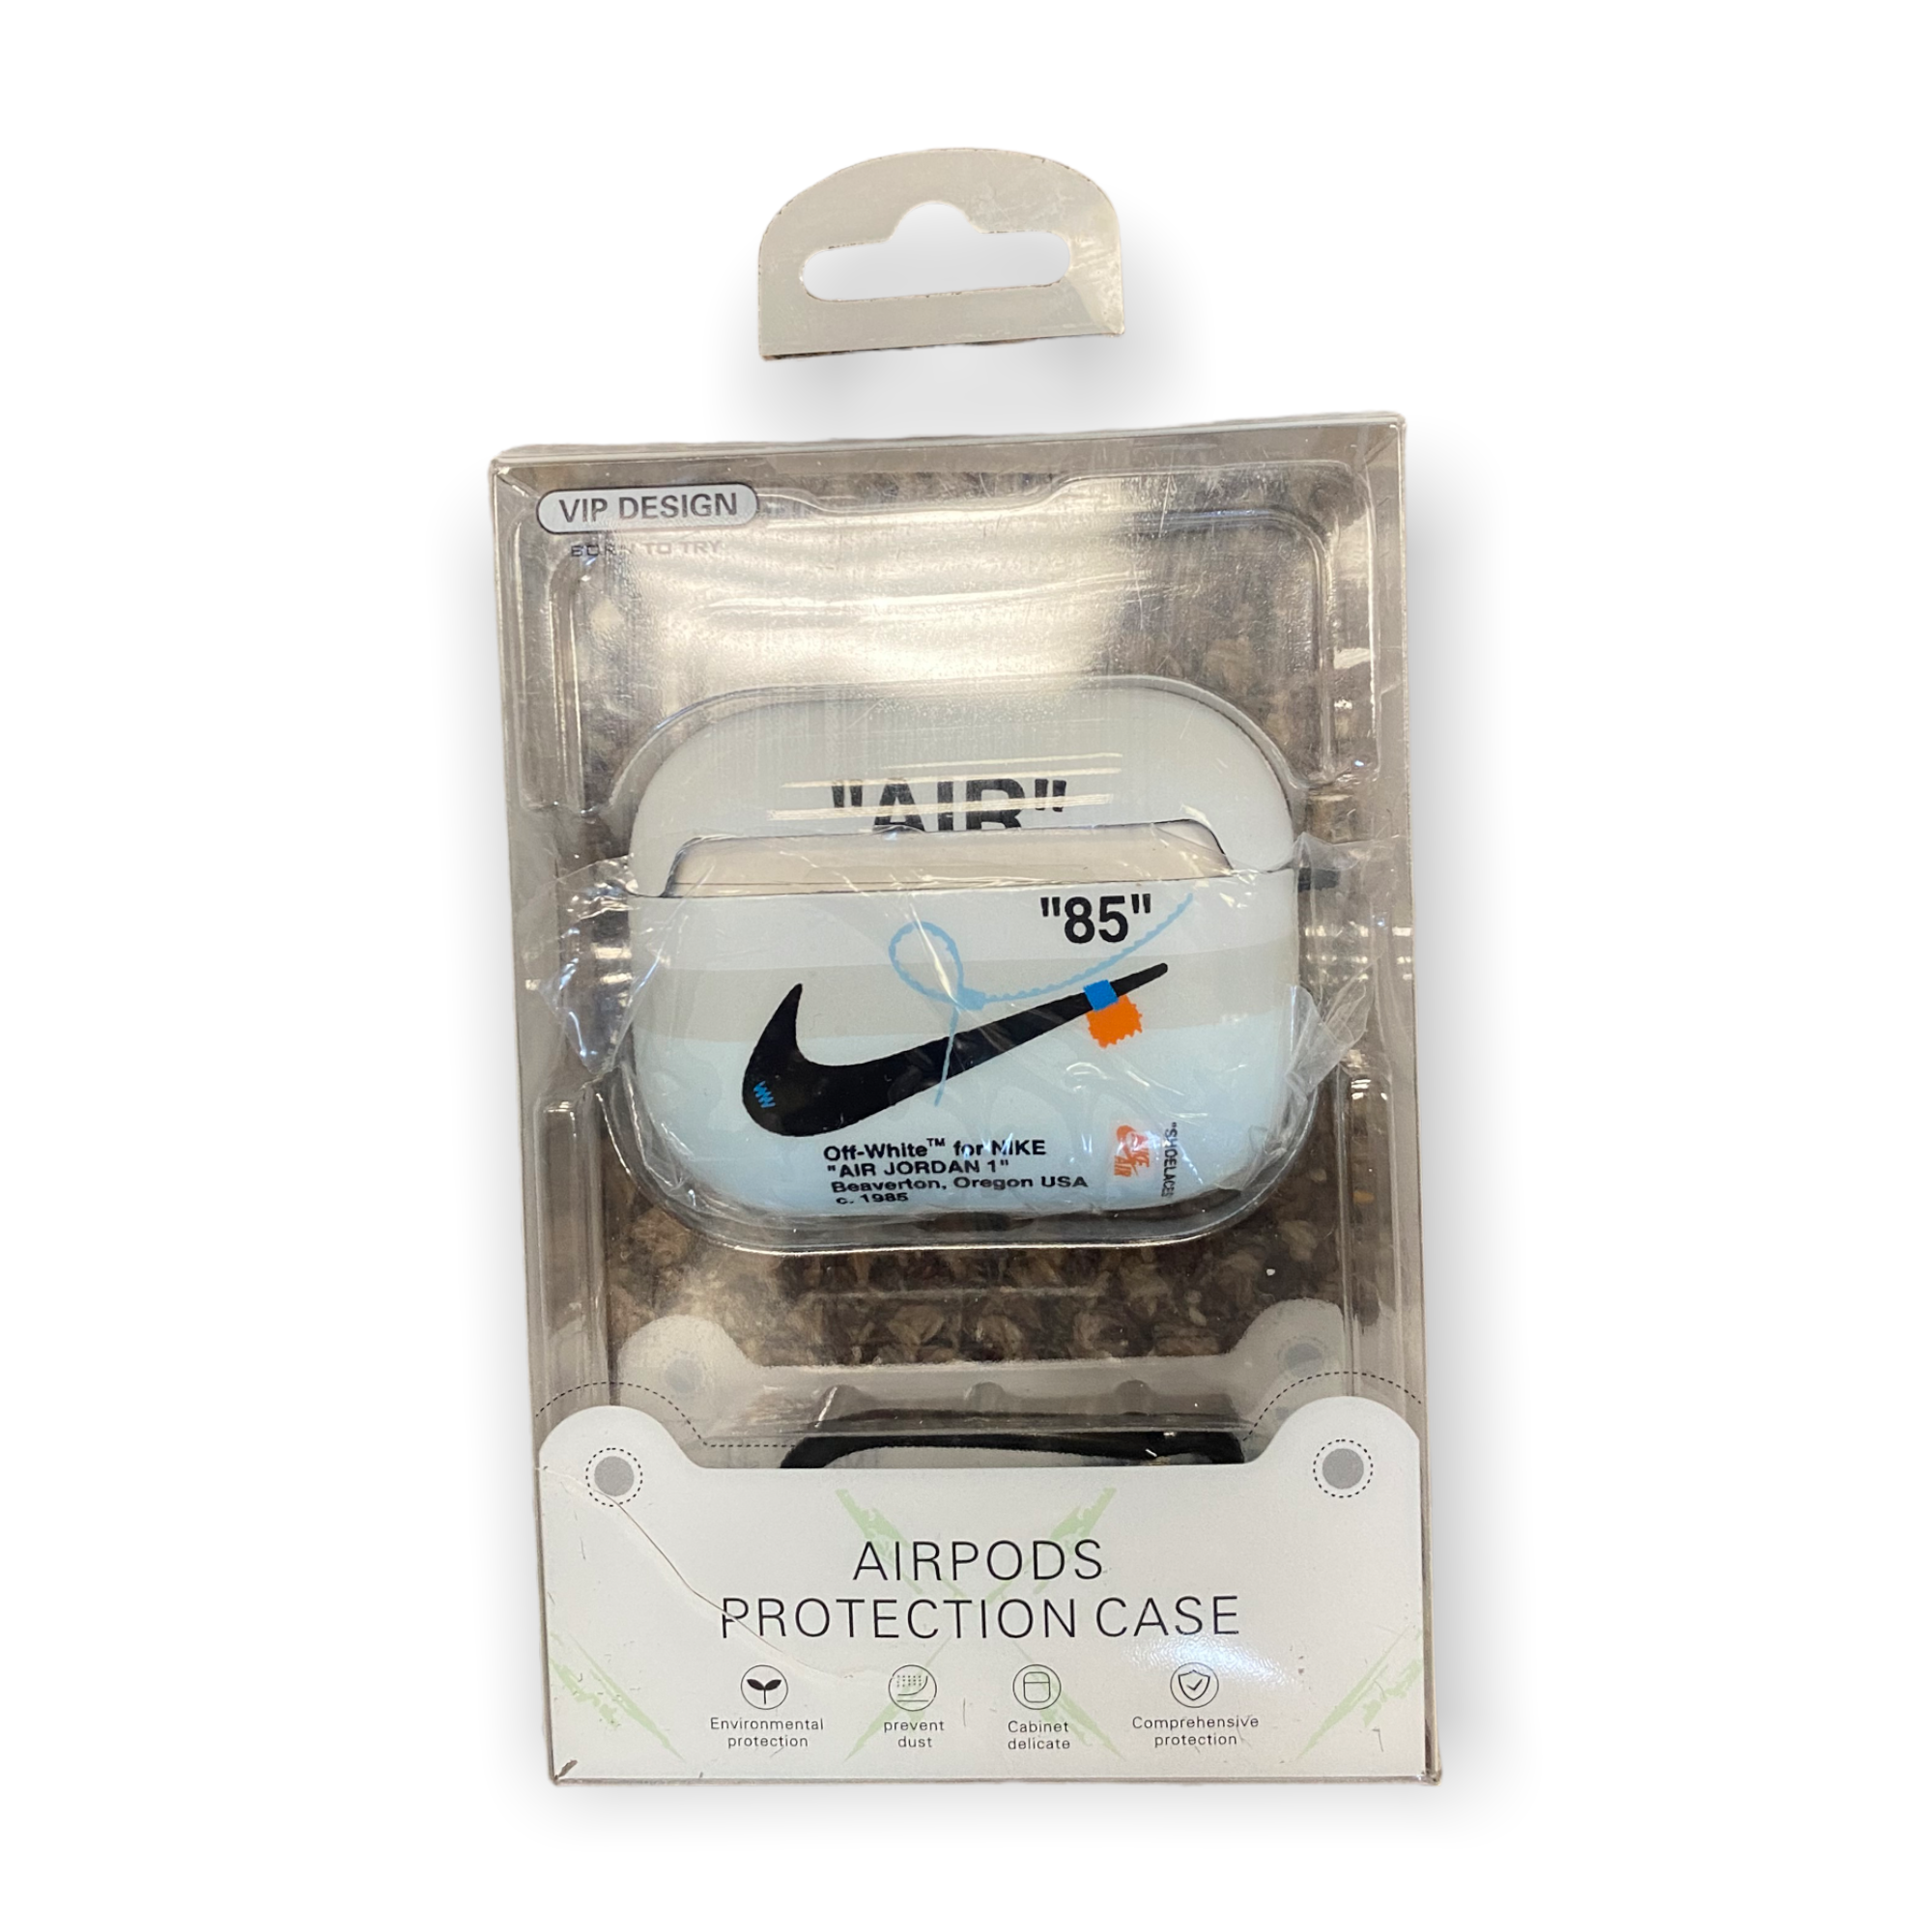 Off-White for Nike Design AirPods Protection Fashion LLC